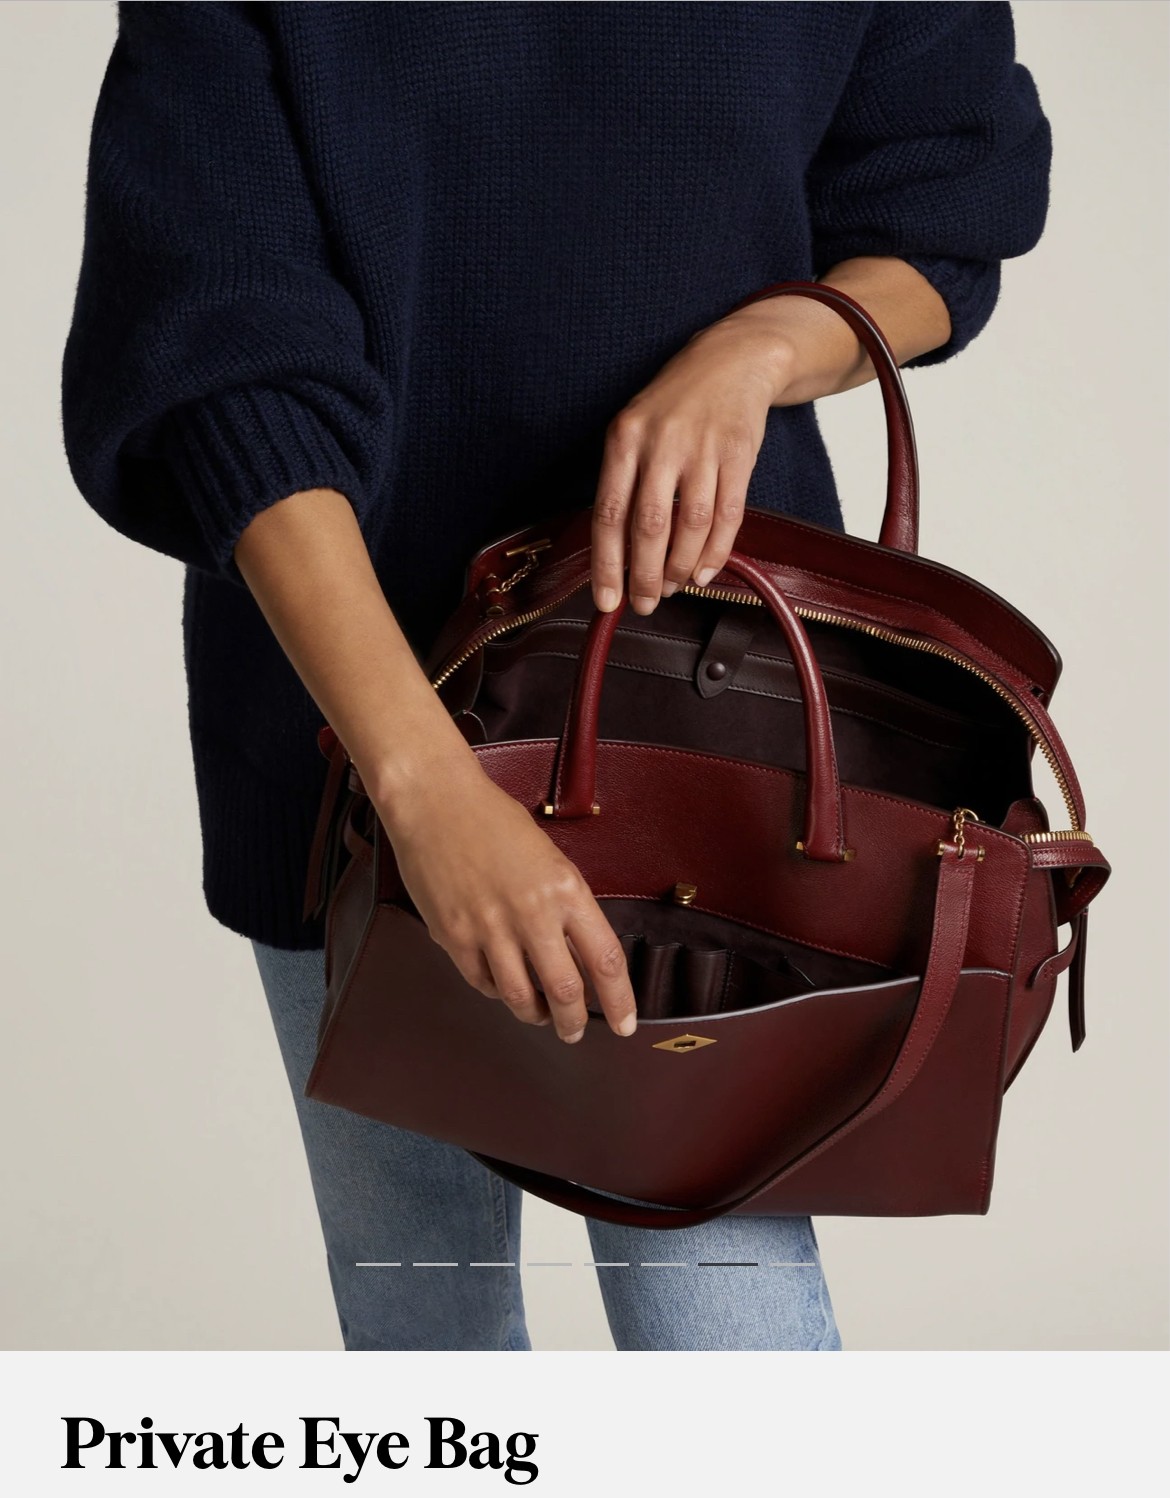 Which Designer Bag Are You Ready to Say Goodbye to? - PurseBlog